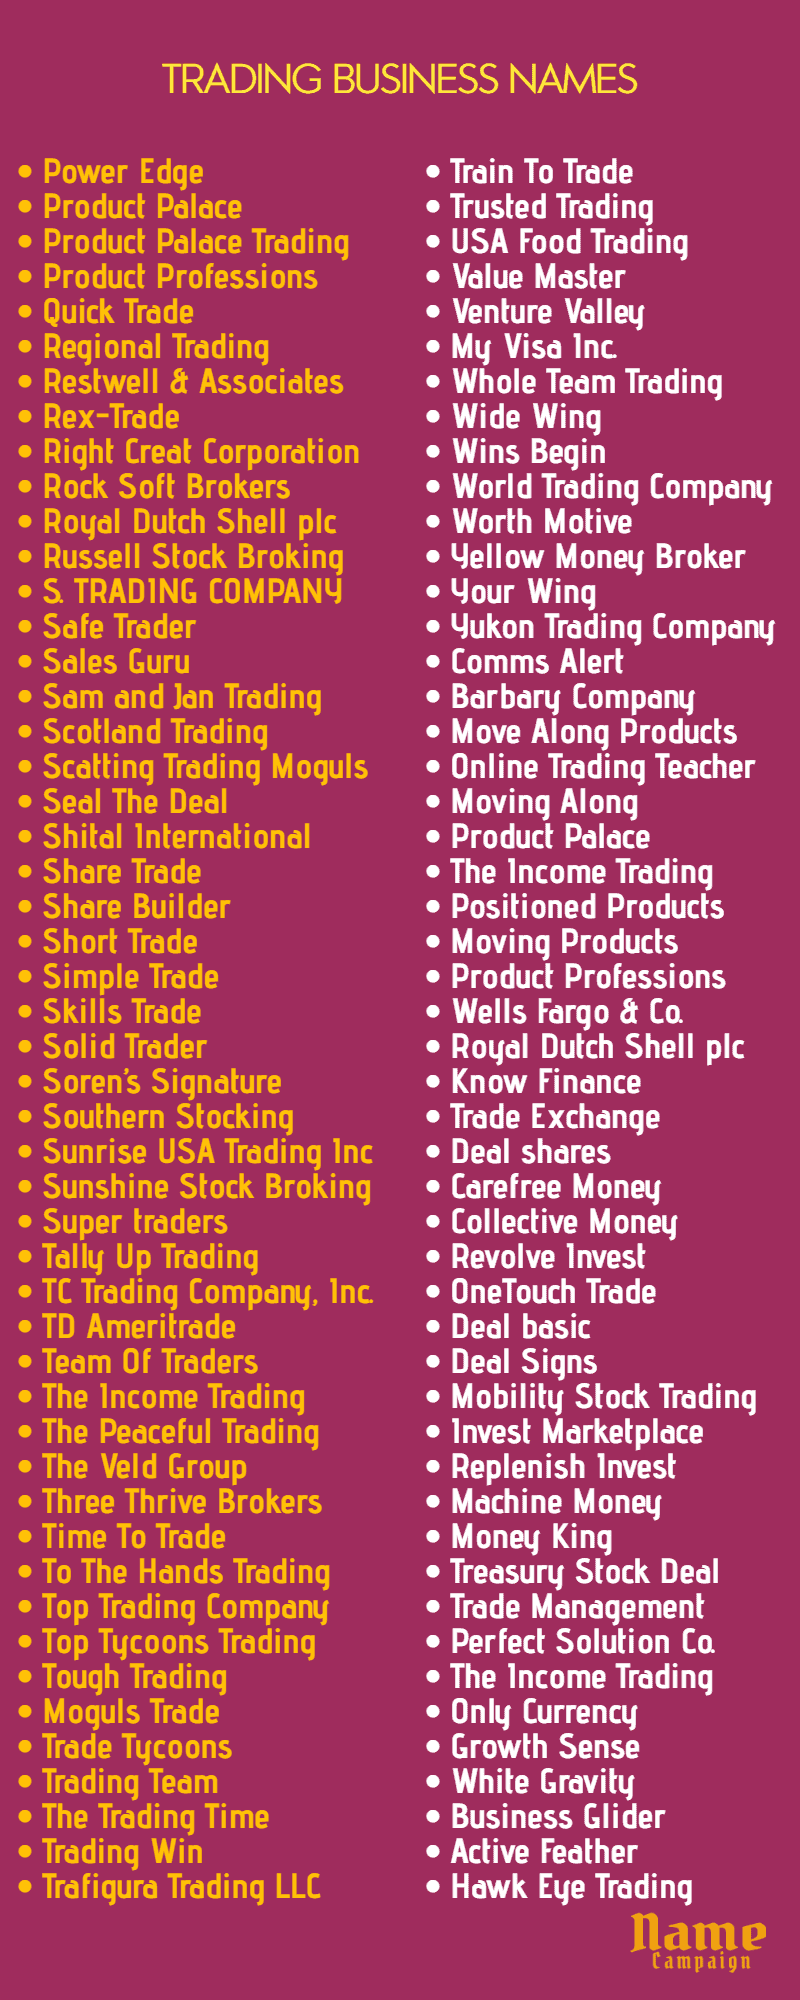 trading company names: best trading companies